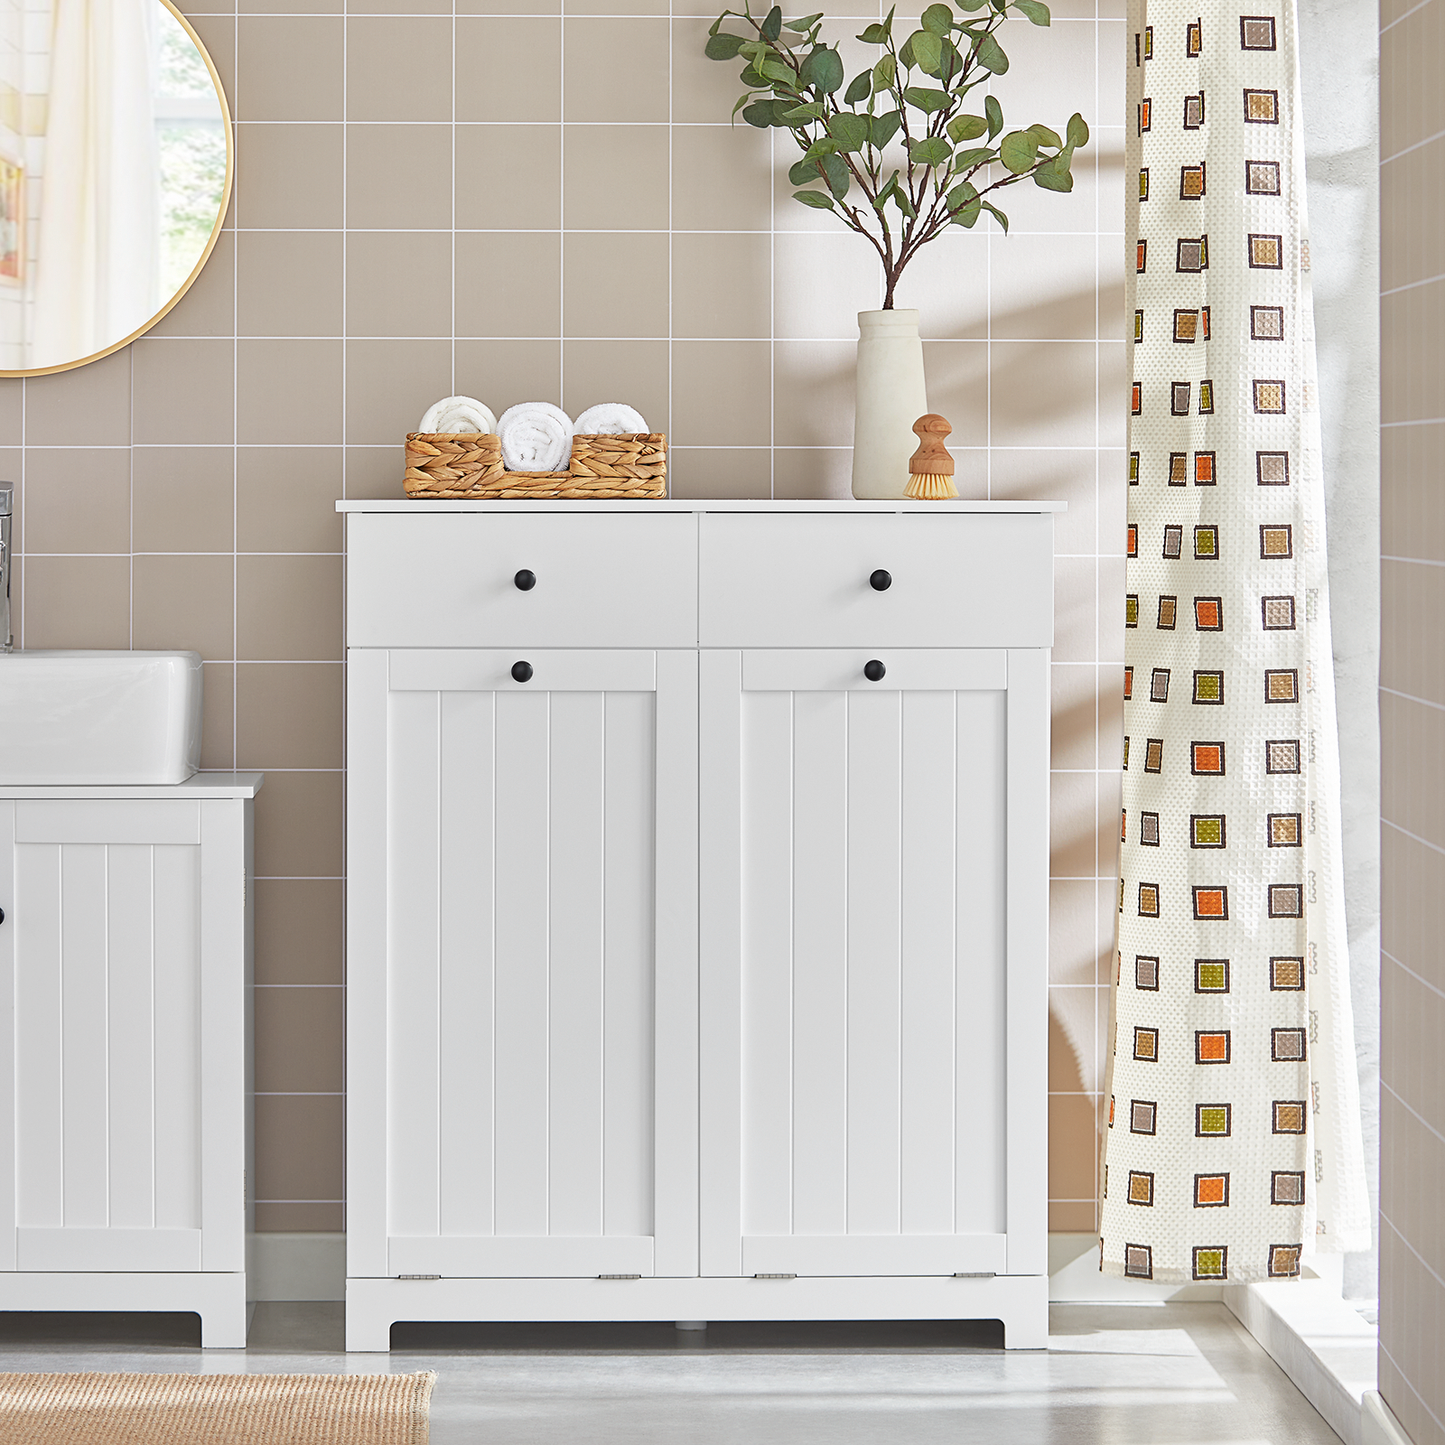 SoBuy 2 Drawers 2 Doors Laundry Cabinet Laundry Chest with 2 Removable Laundry Baskets, Bathroom Cabinet